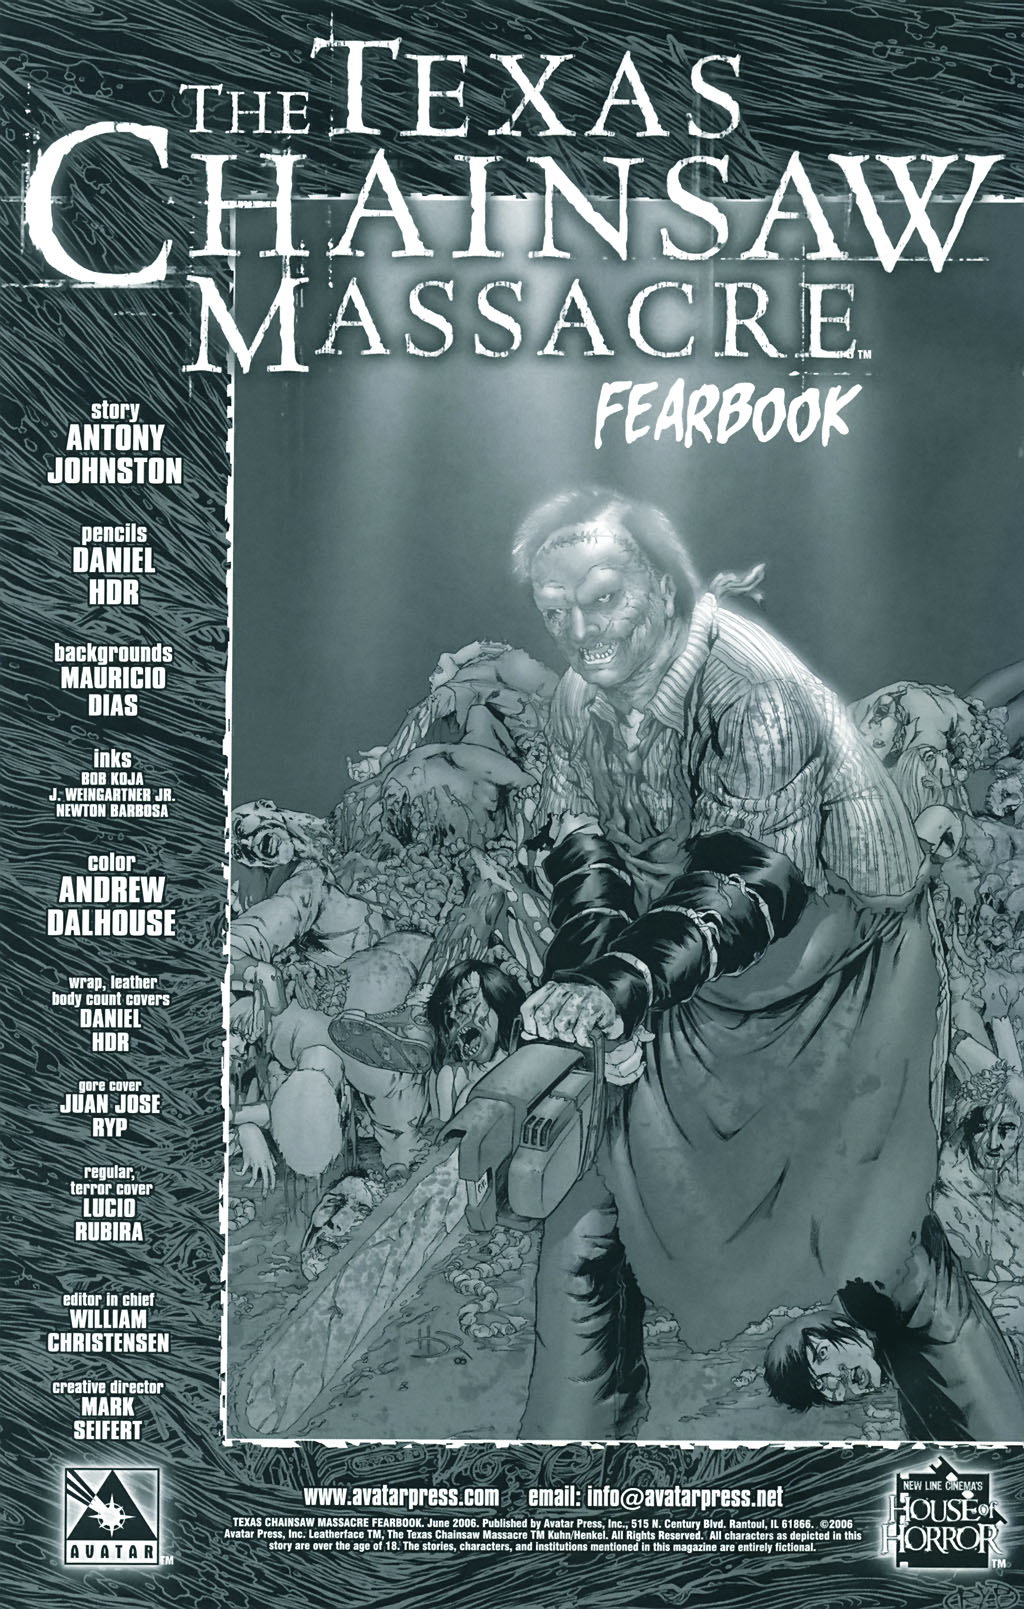 Read online Texas Chainsaw Massacre Fearbook comic -  Issue # Full - 7